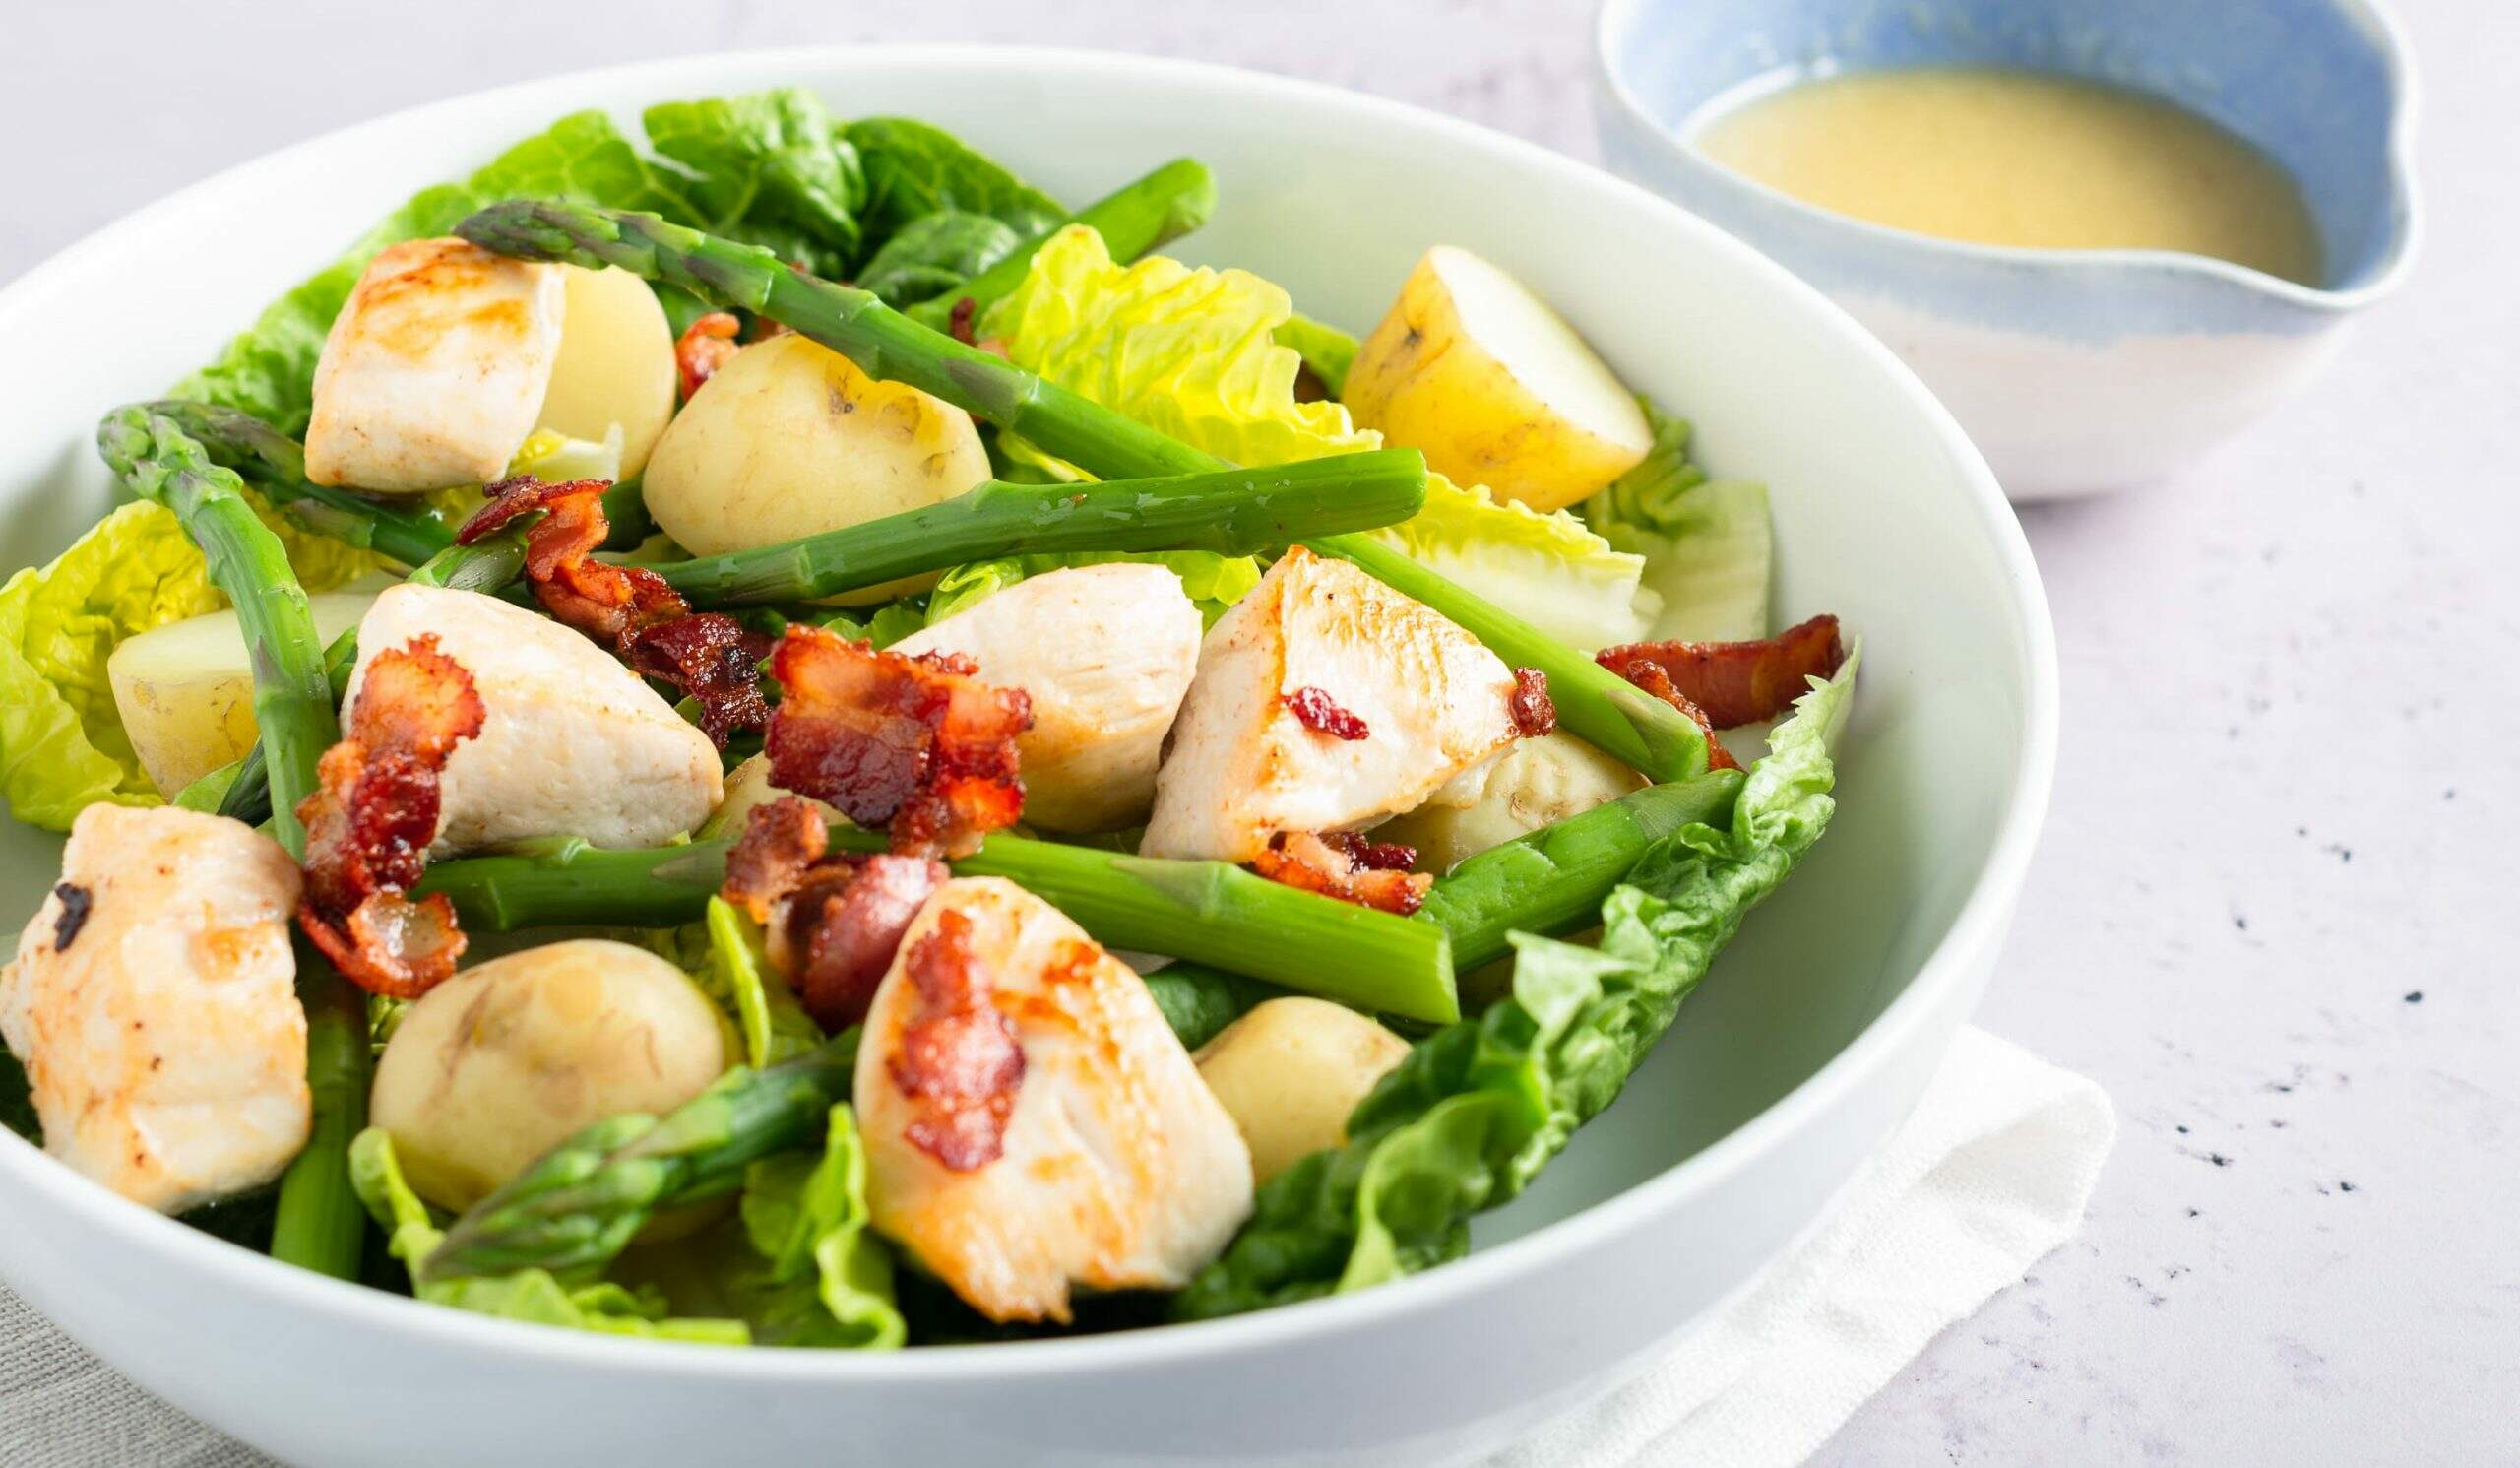 A fresh salas of grilled chicken, asparagus, bacon and new jersey royal potatoes